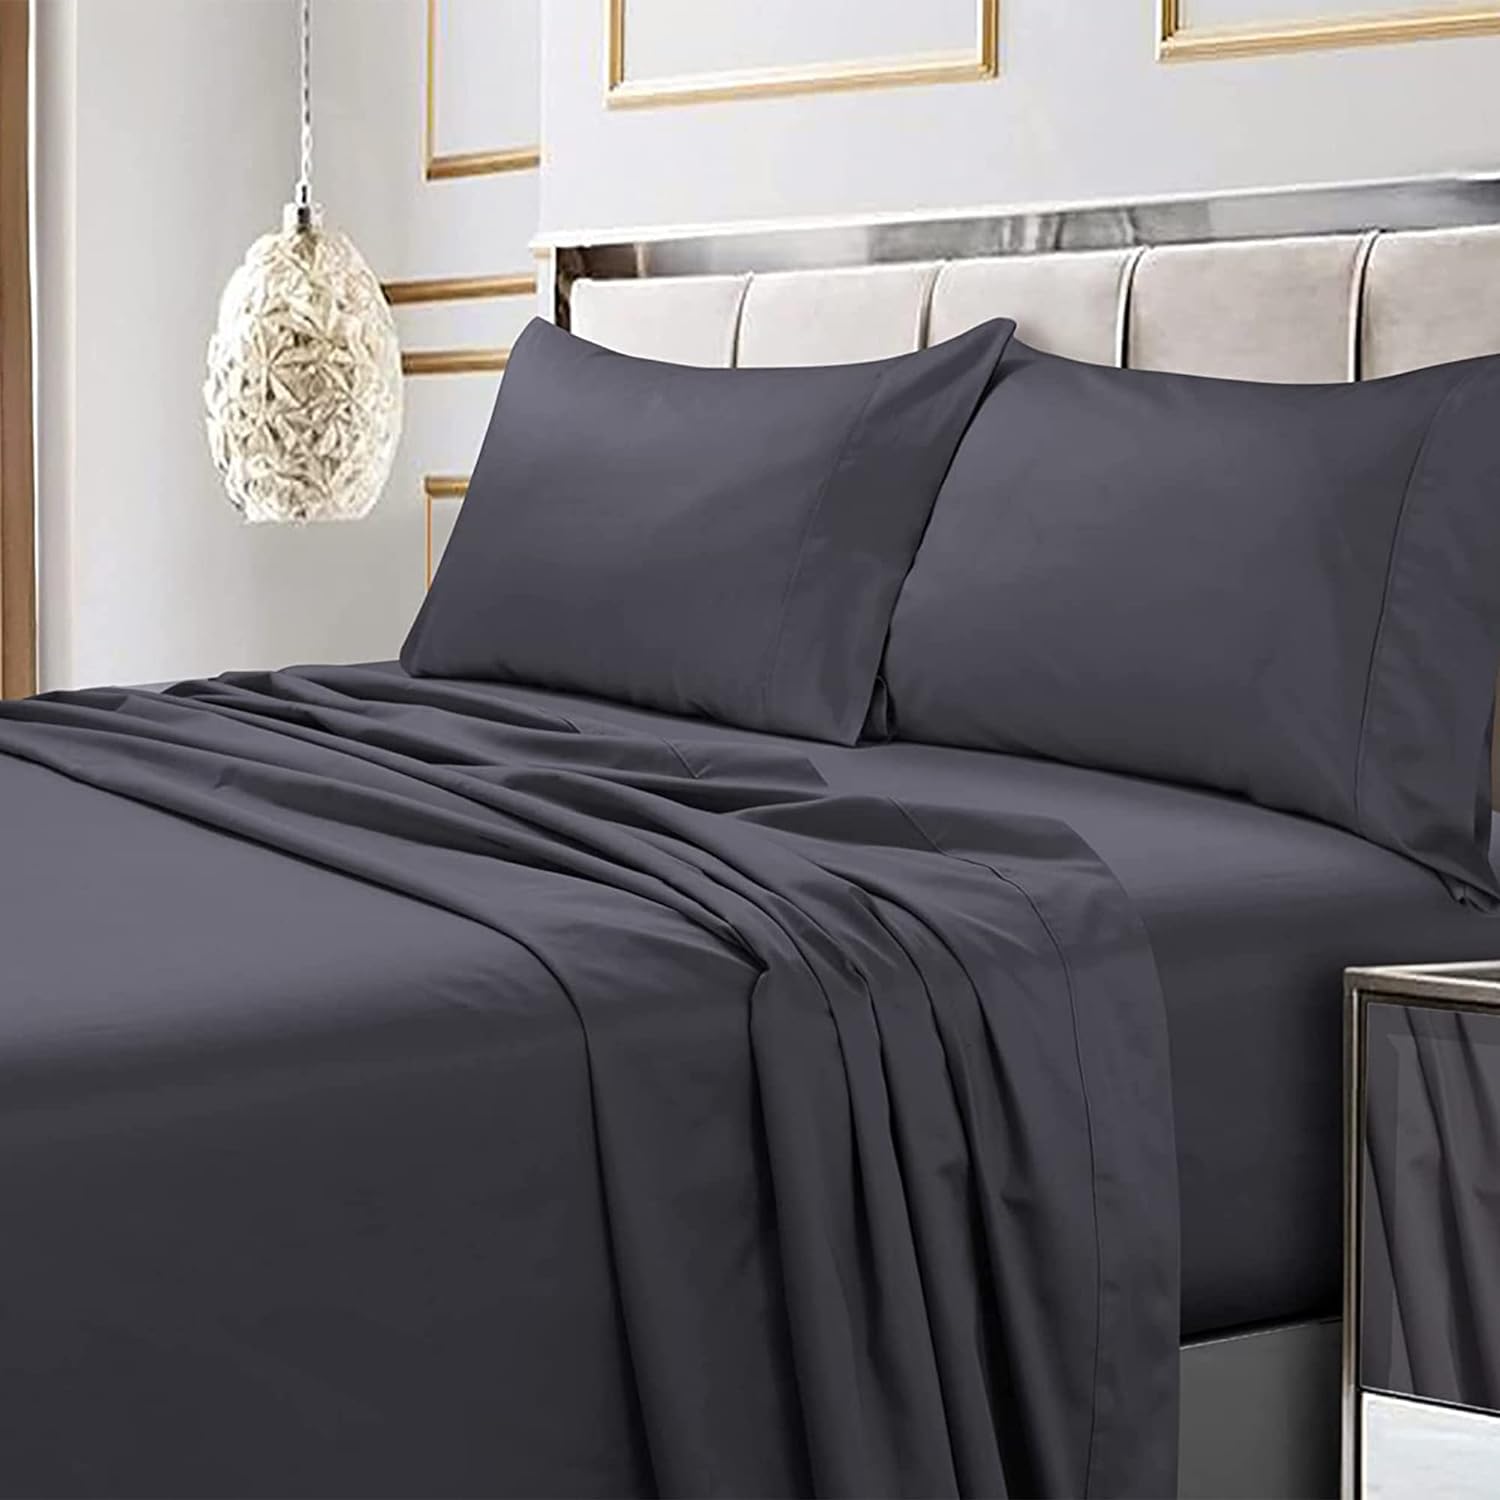 Tribeca Living Soft Egyptian Cotton Sateen Solid Pillowcase Set Extra Deep Pocket, 600 Thread Count, Bed Sheet, Queen, Steel